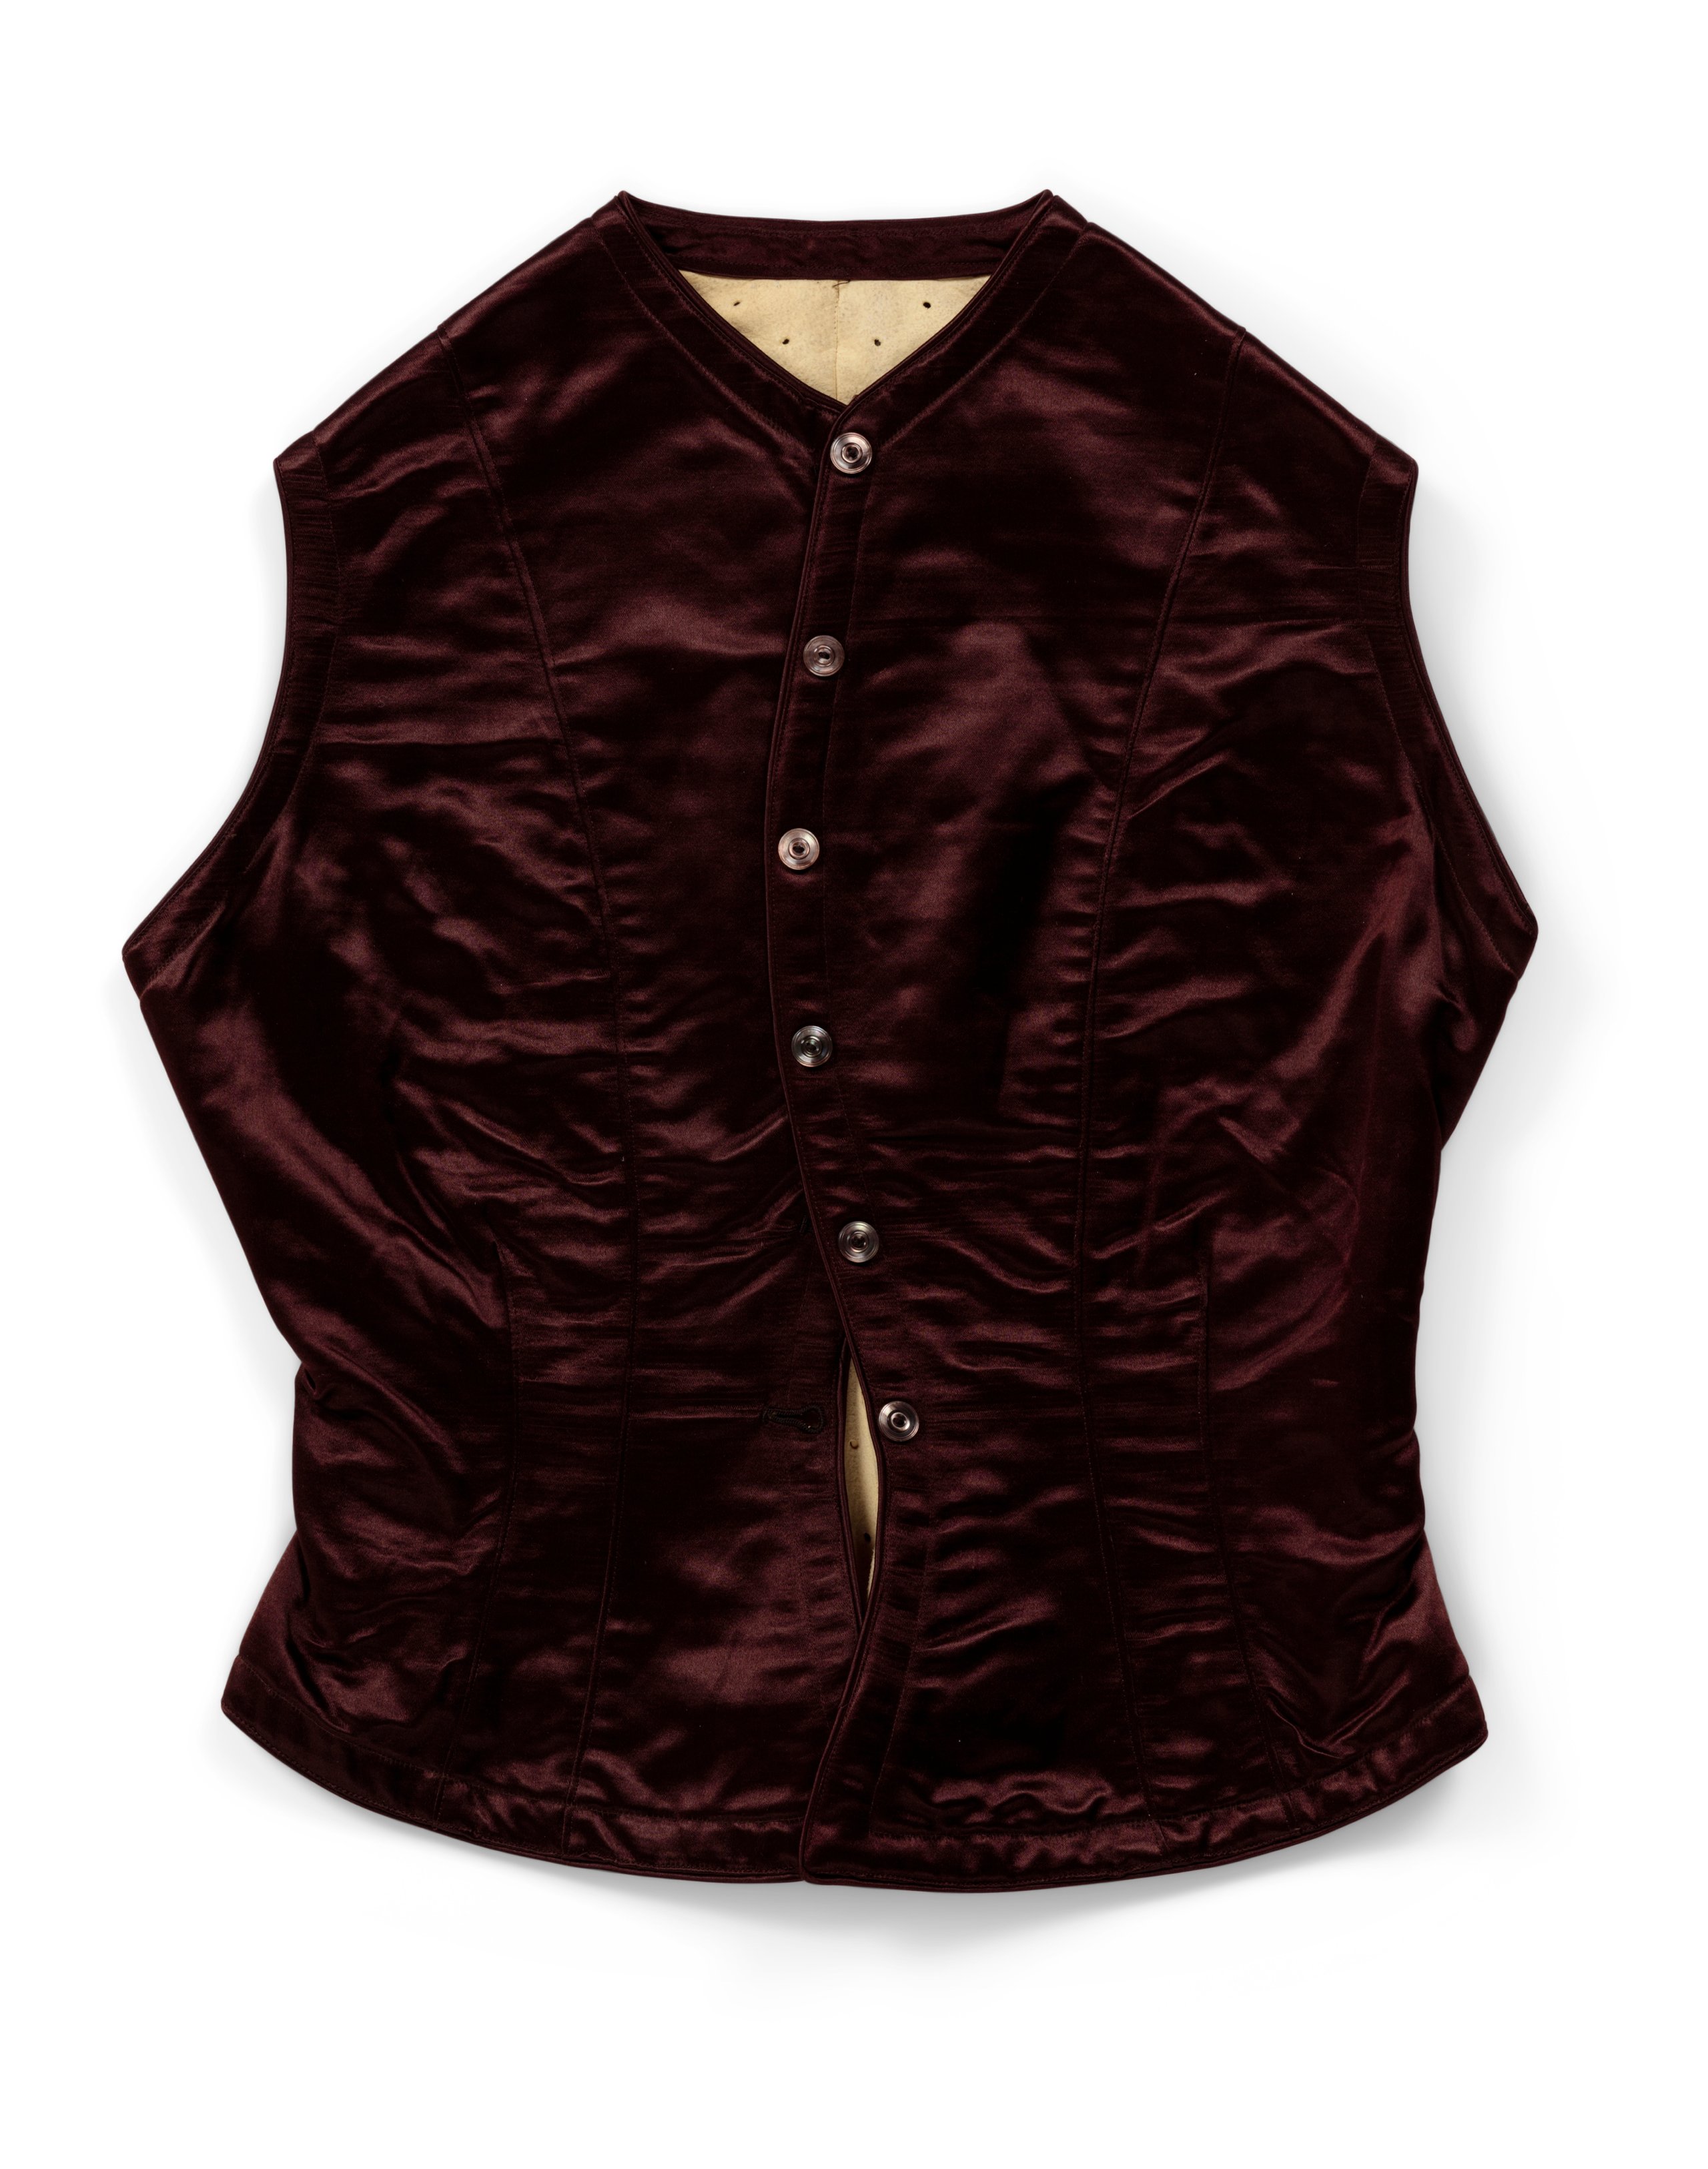 Womens riding waistcoat owned by the D'Arcy family